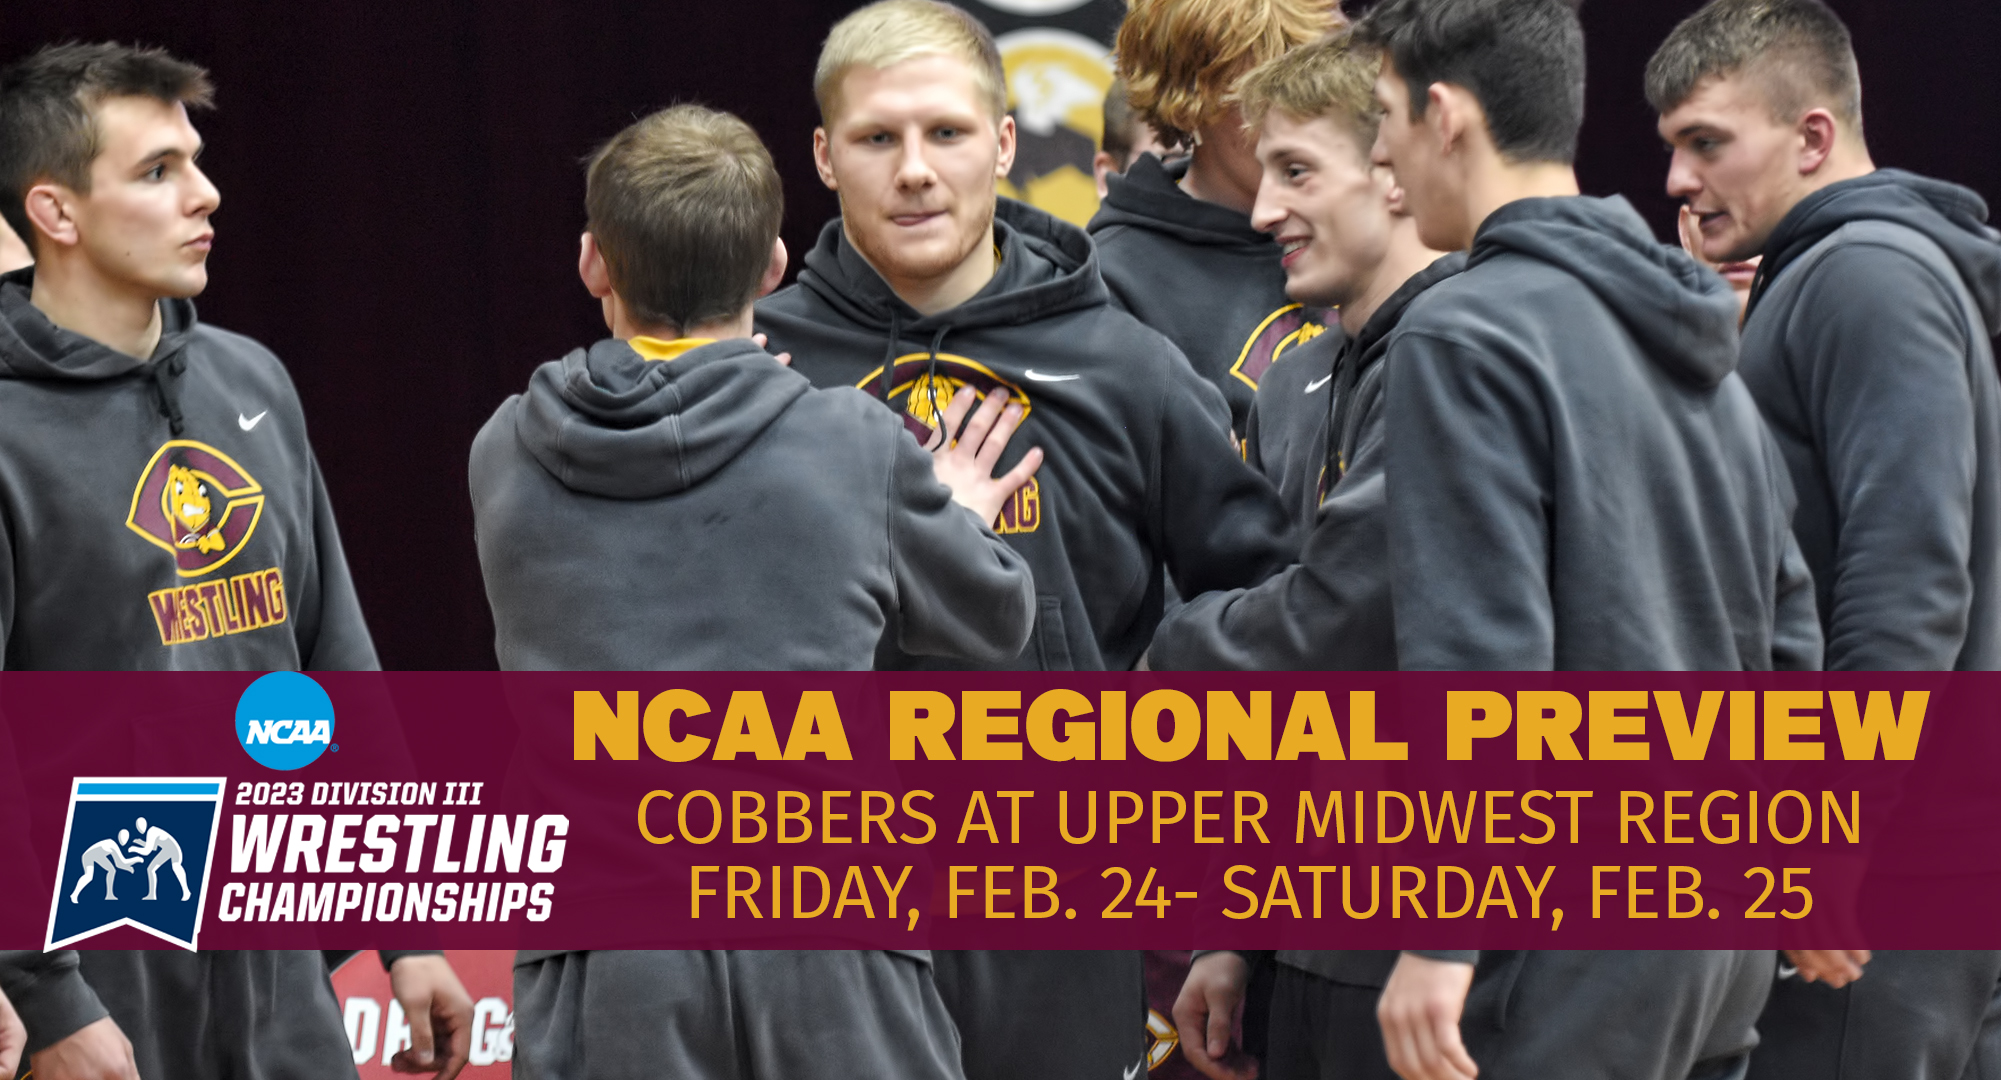 The Cobbers are primed and ready for their biggest challenge of the year when they participate at the NCAA Upper Midwest Regional.